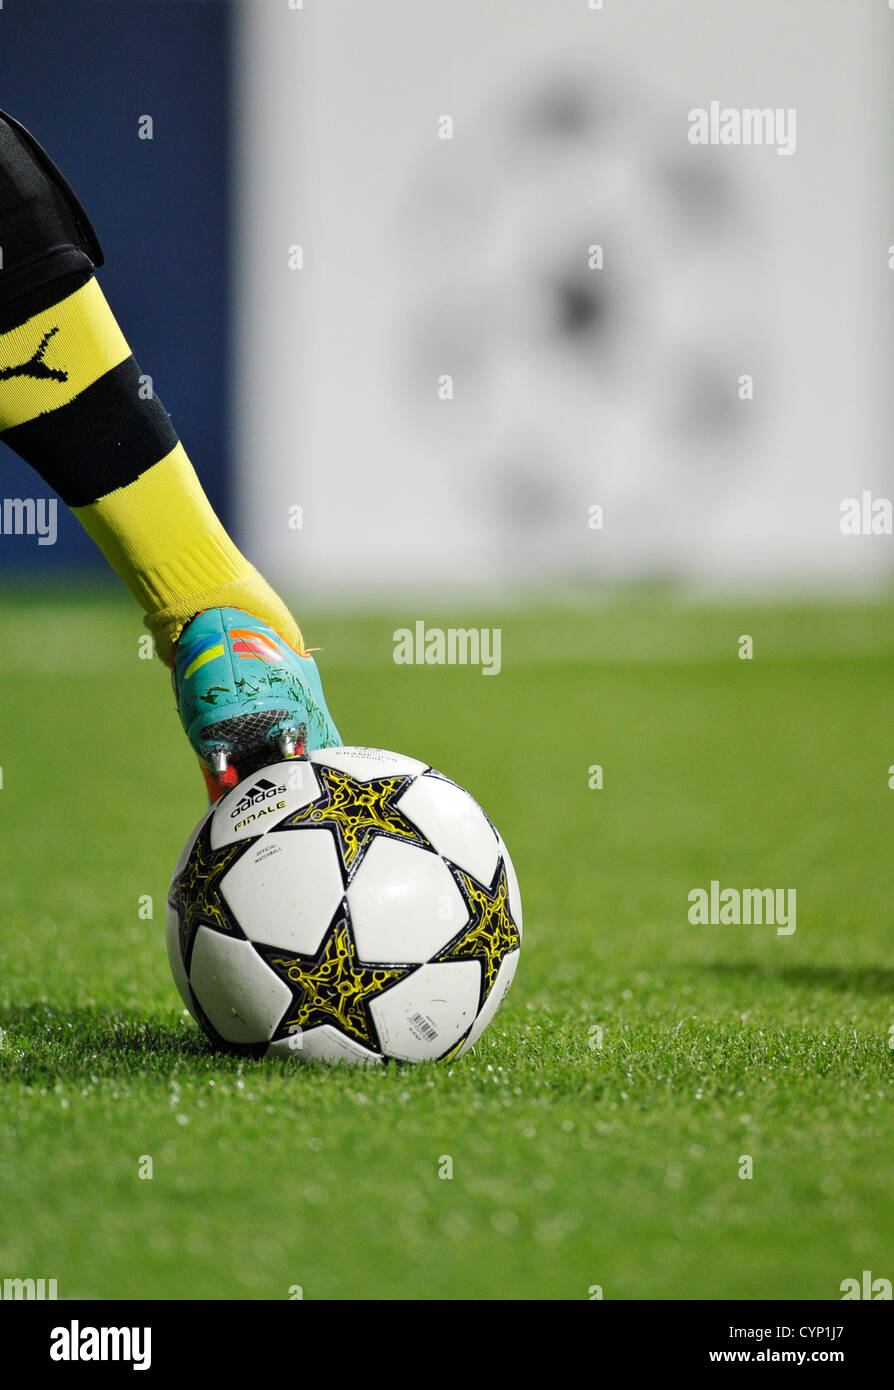 Champions League Finale High Resolution Stock Photography and Images - Alamy